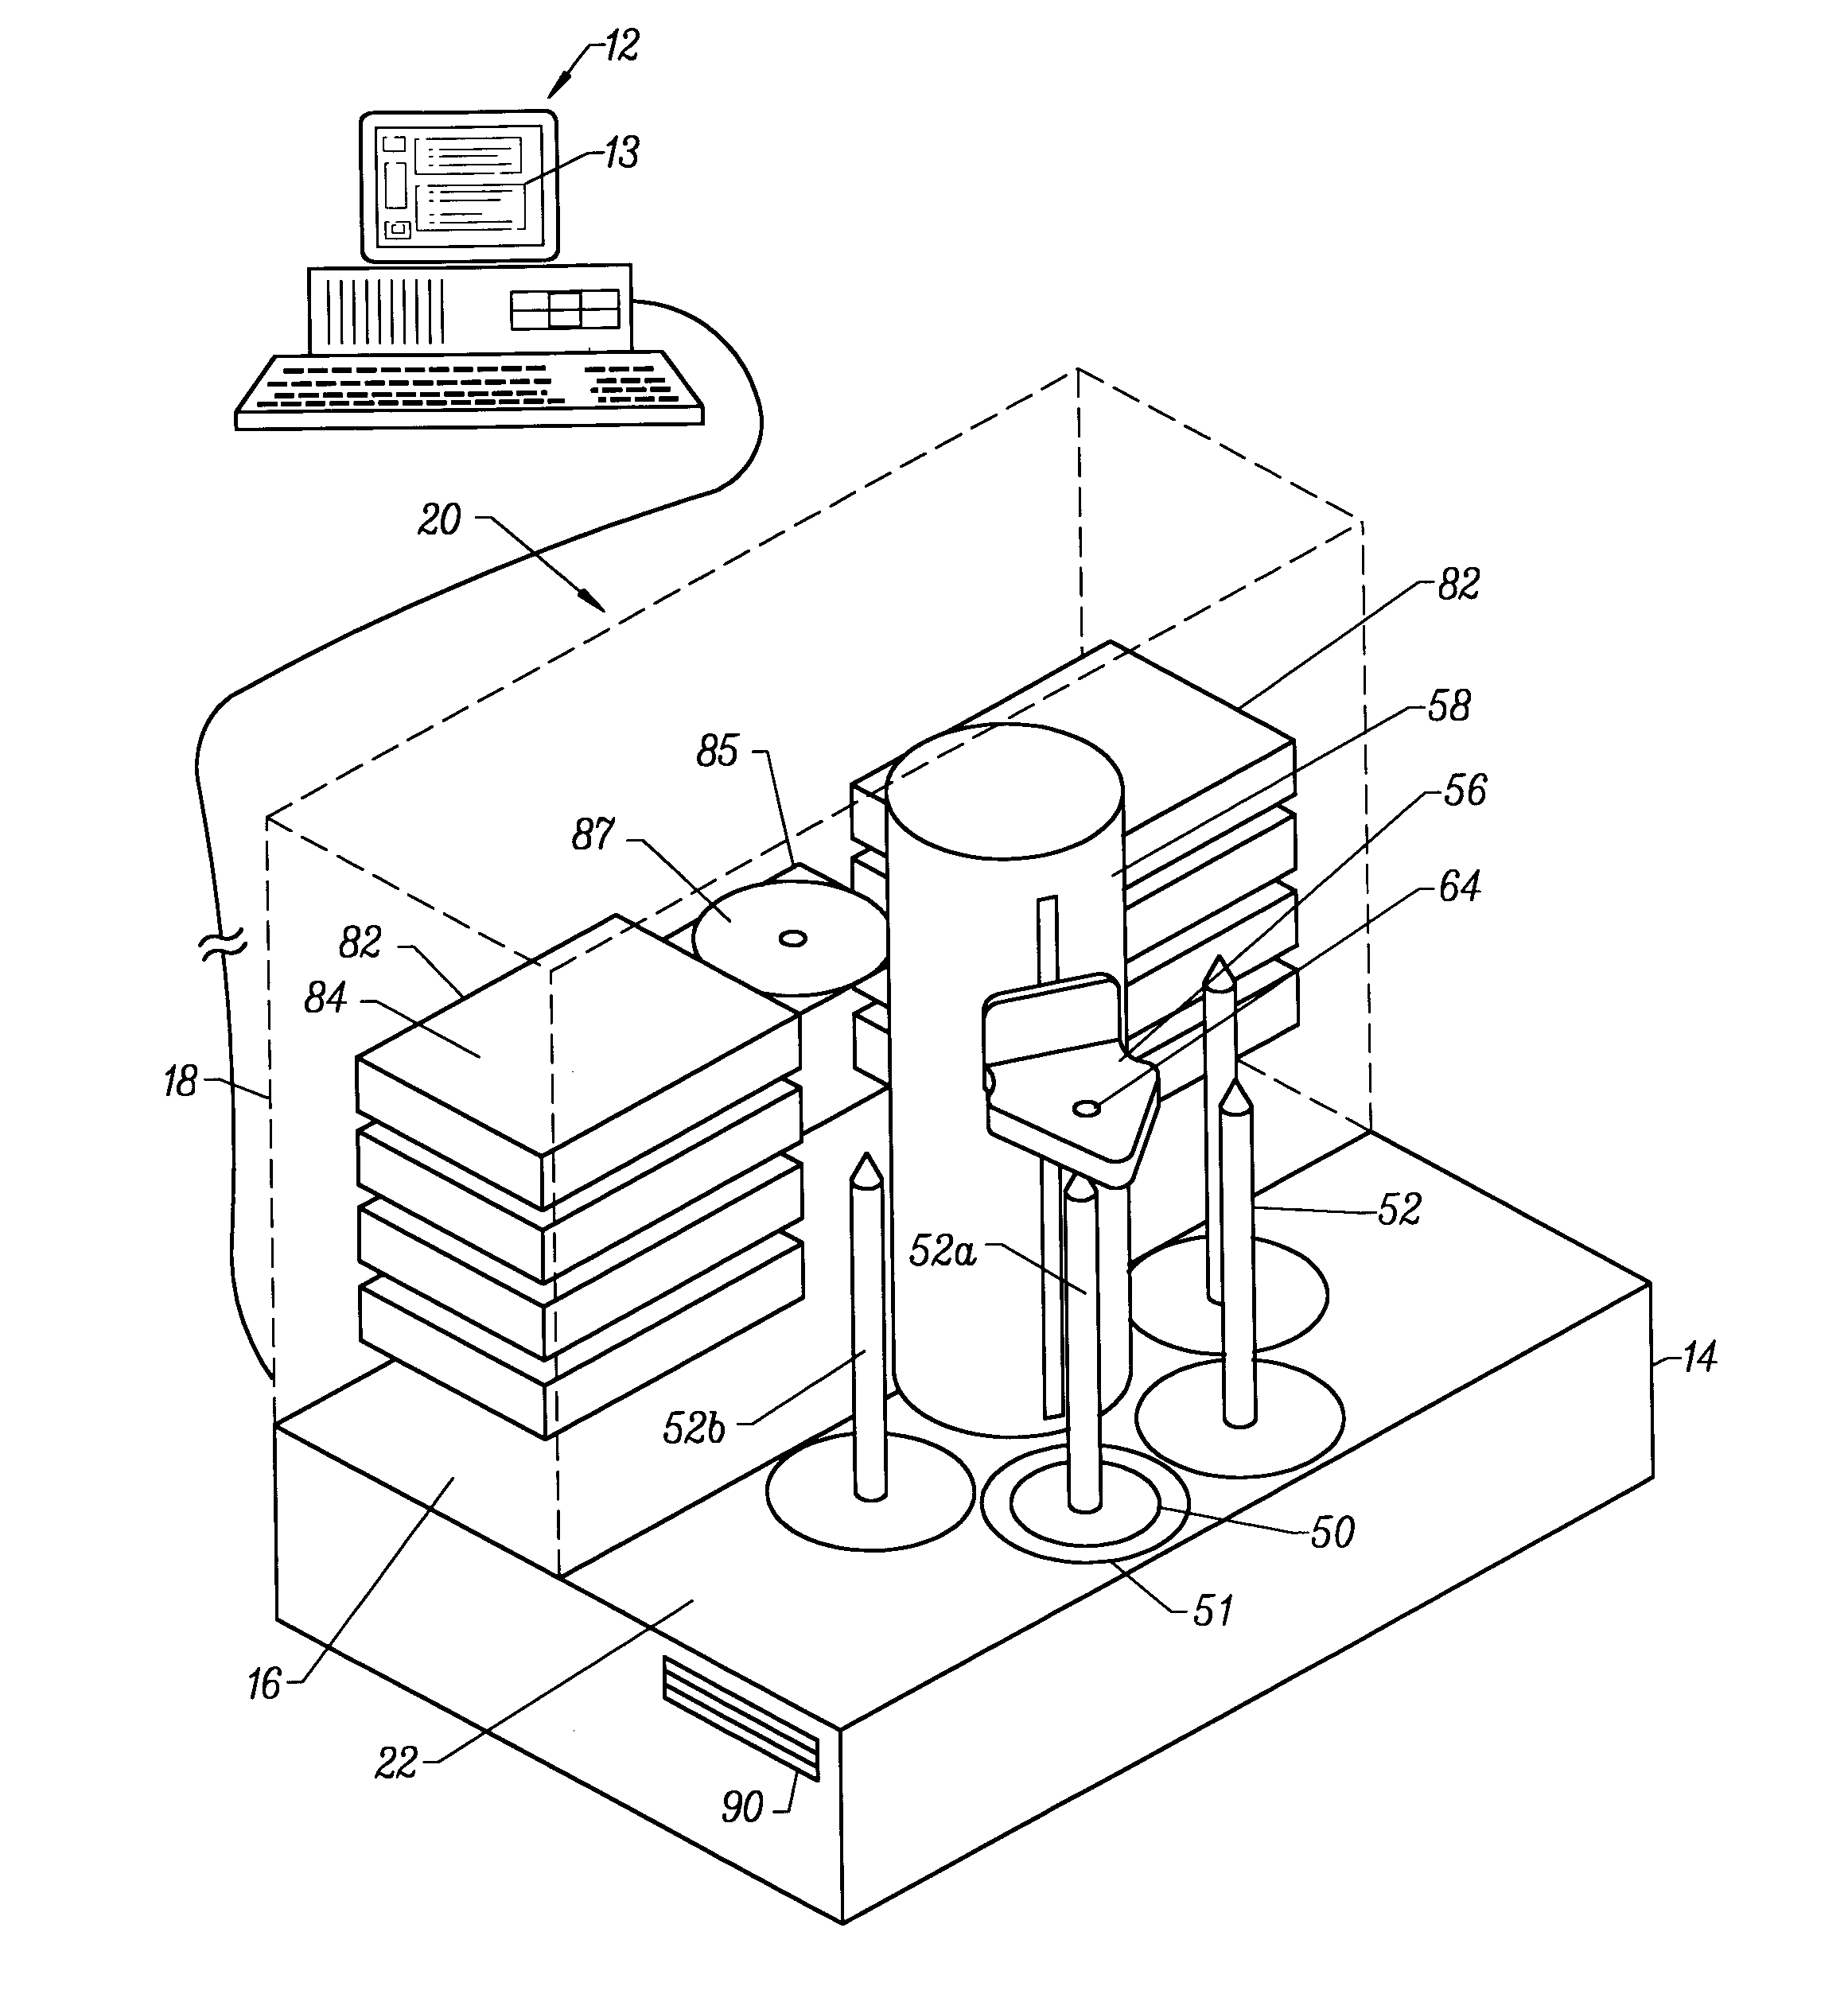 Programmable self-operating compact disk duplication system